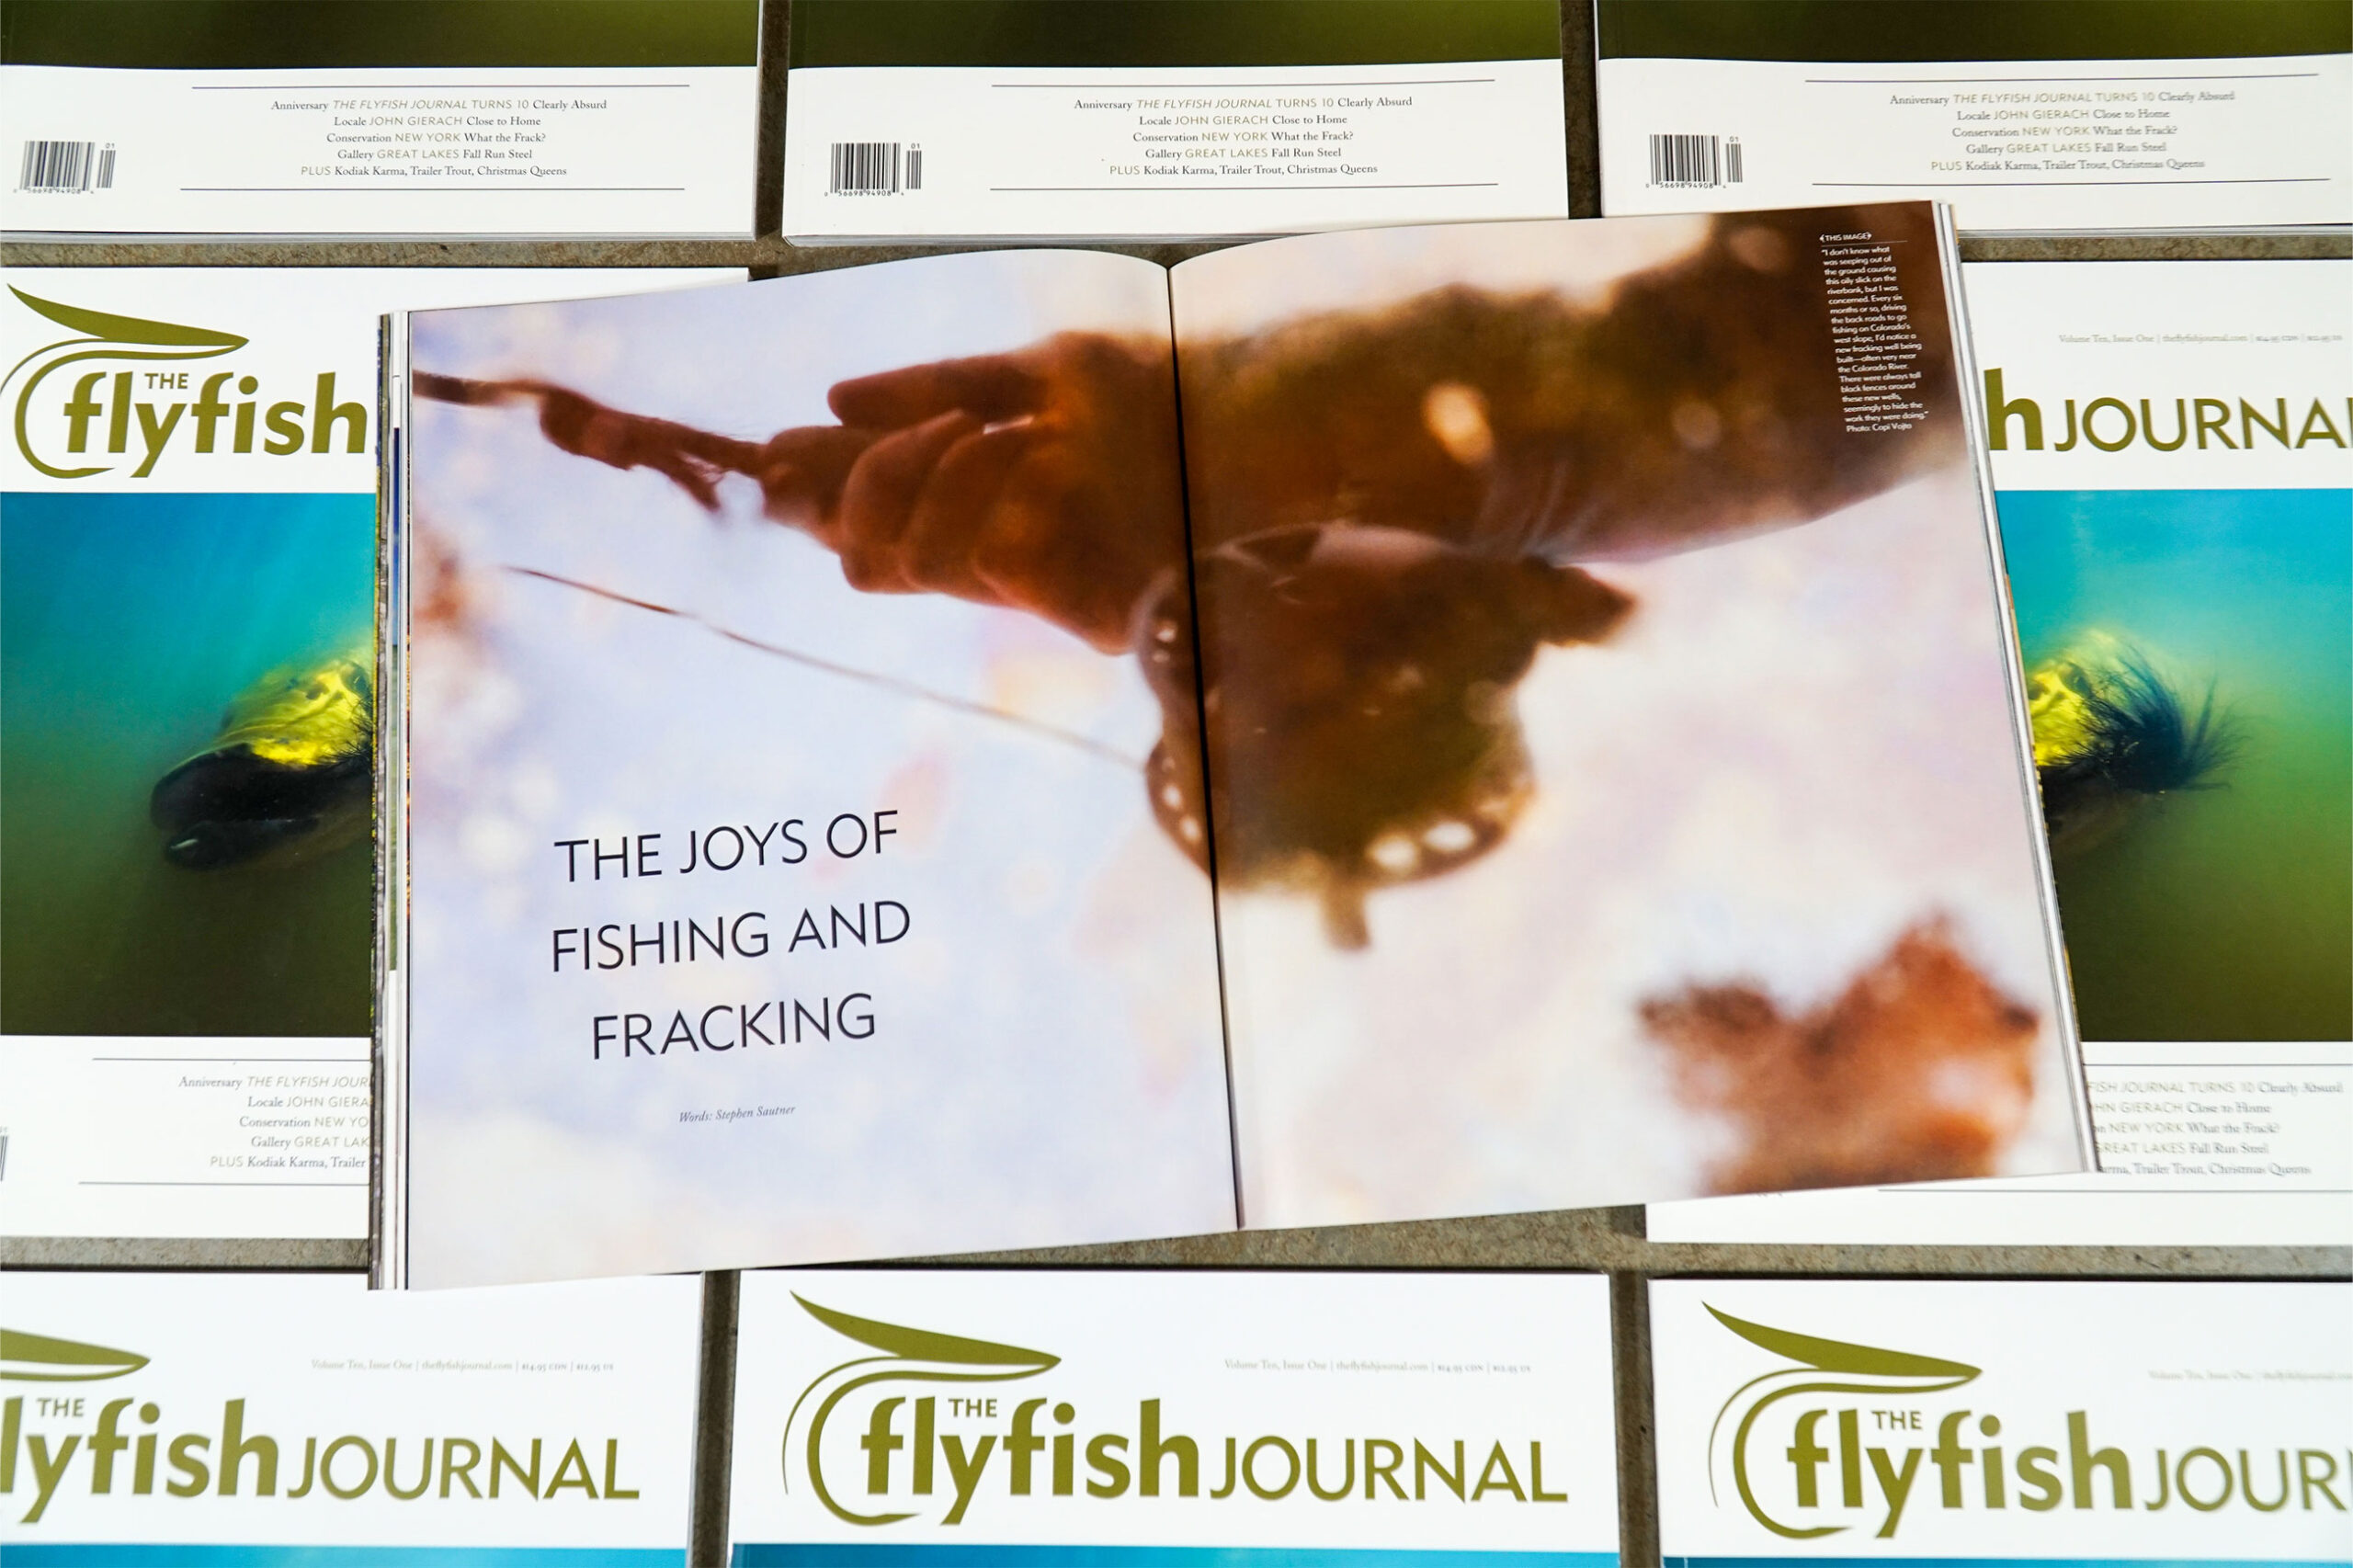 The Flyfish Journal Volume 10 Issue 1 Feature The Joys of Fishing and Fracking